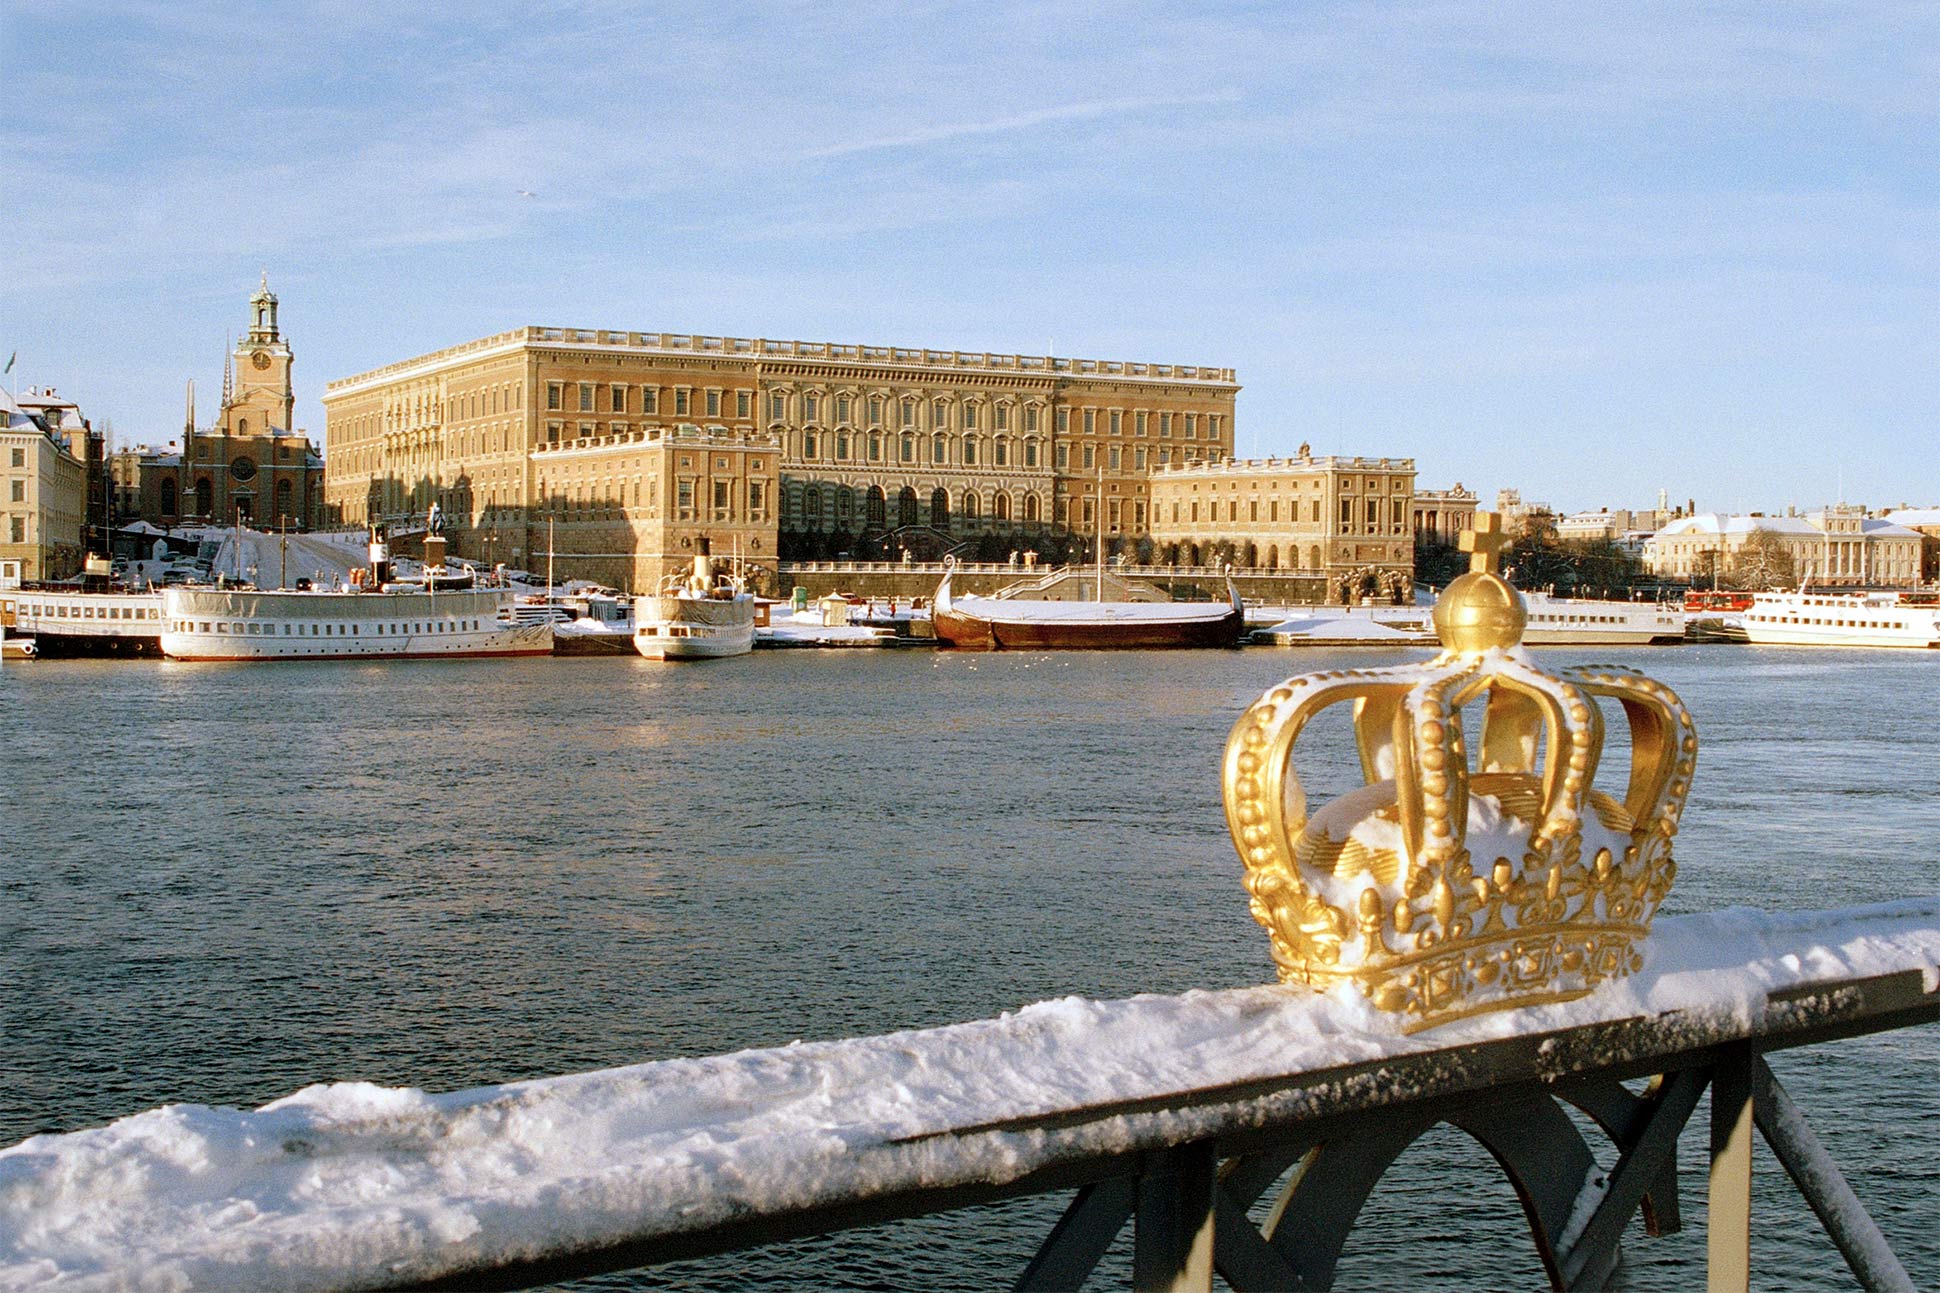 The Royal Palace sits proudly in Stockholm's old town, Stockholm, Sweden